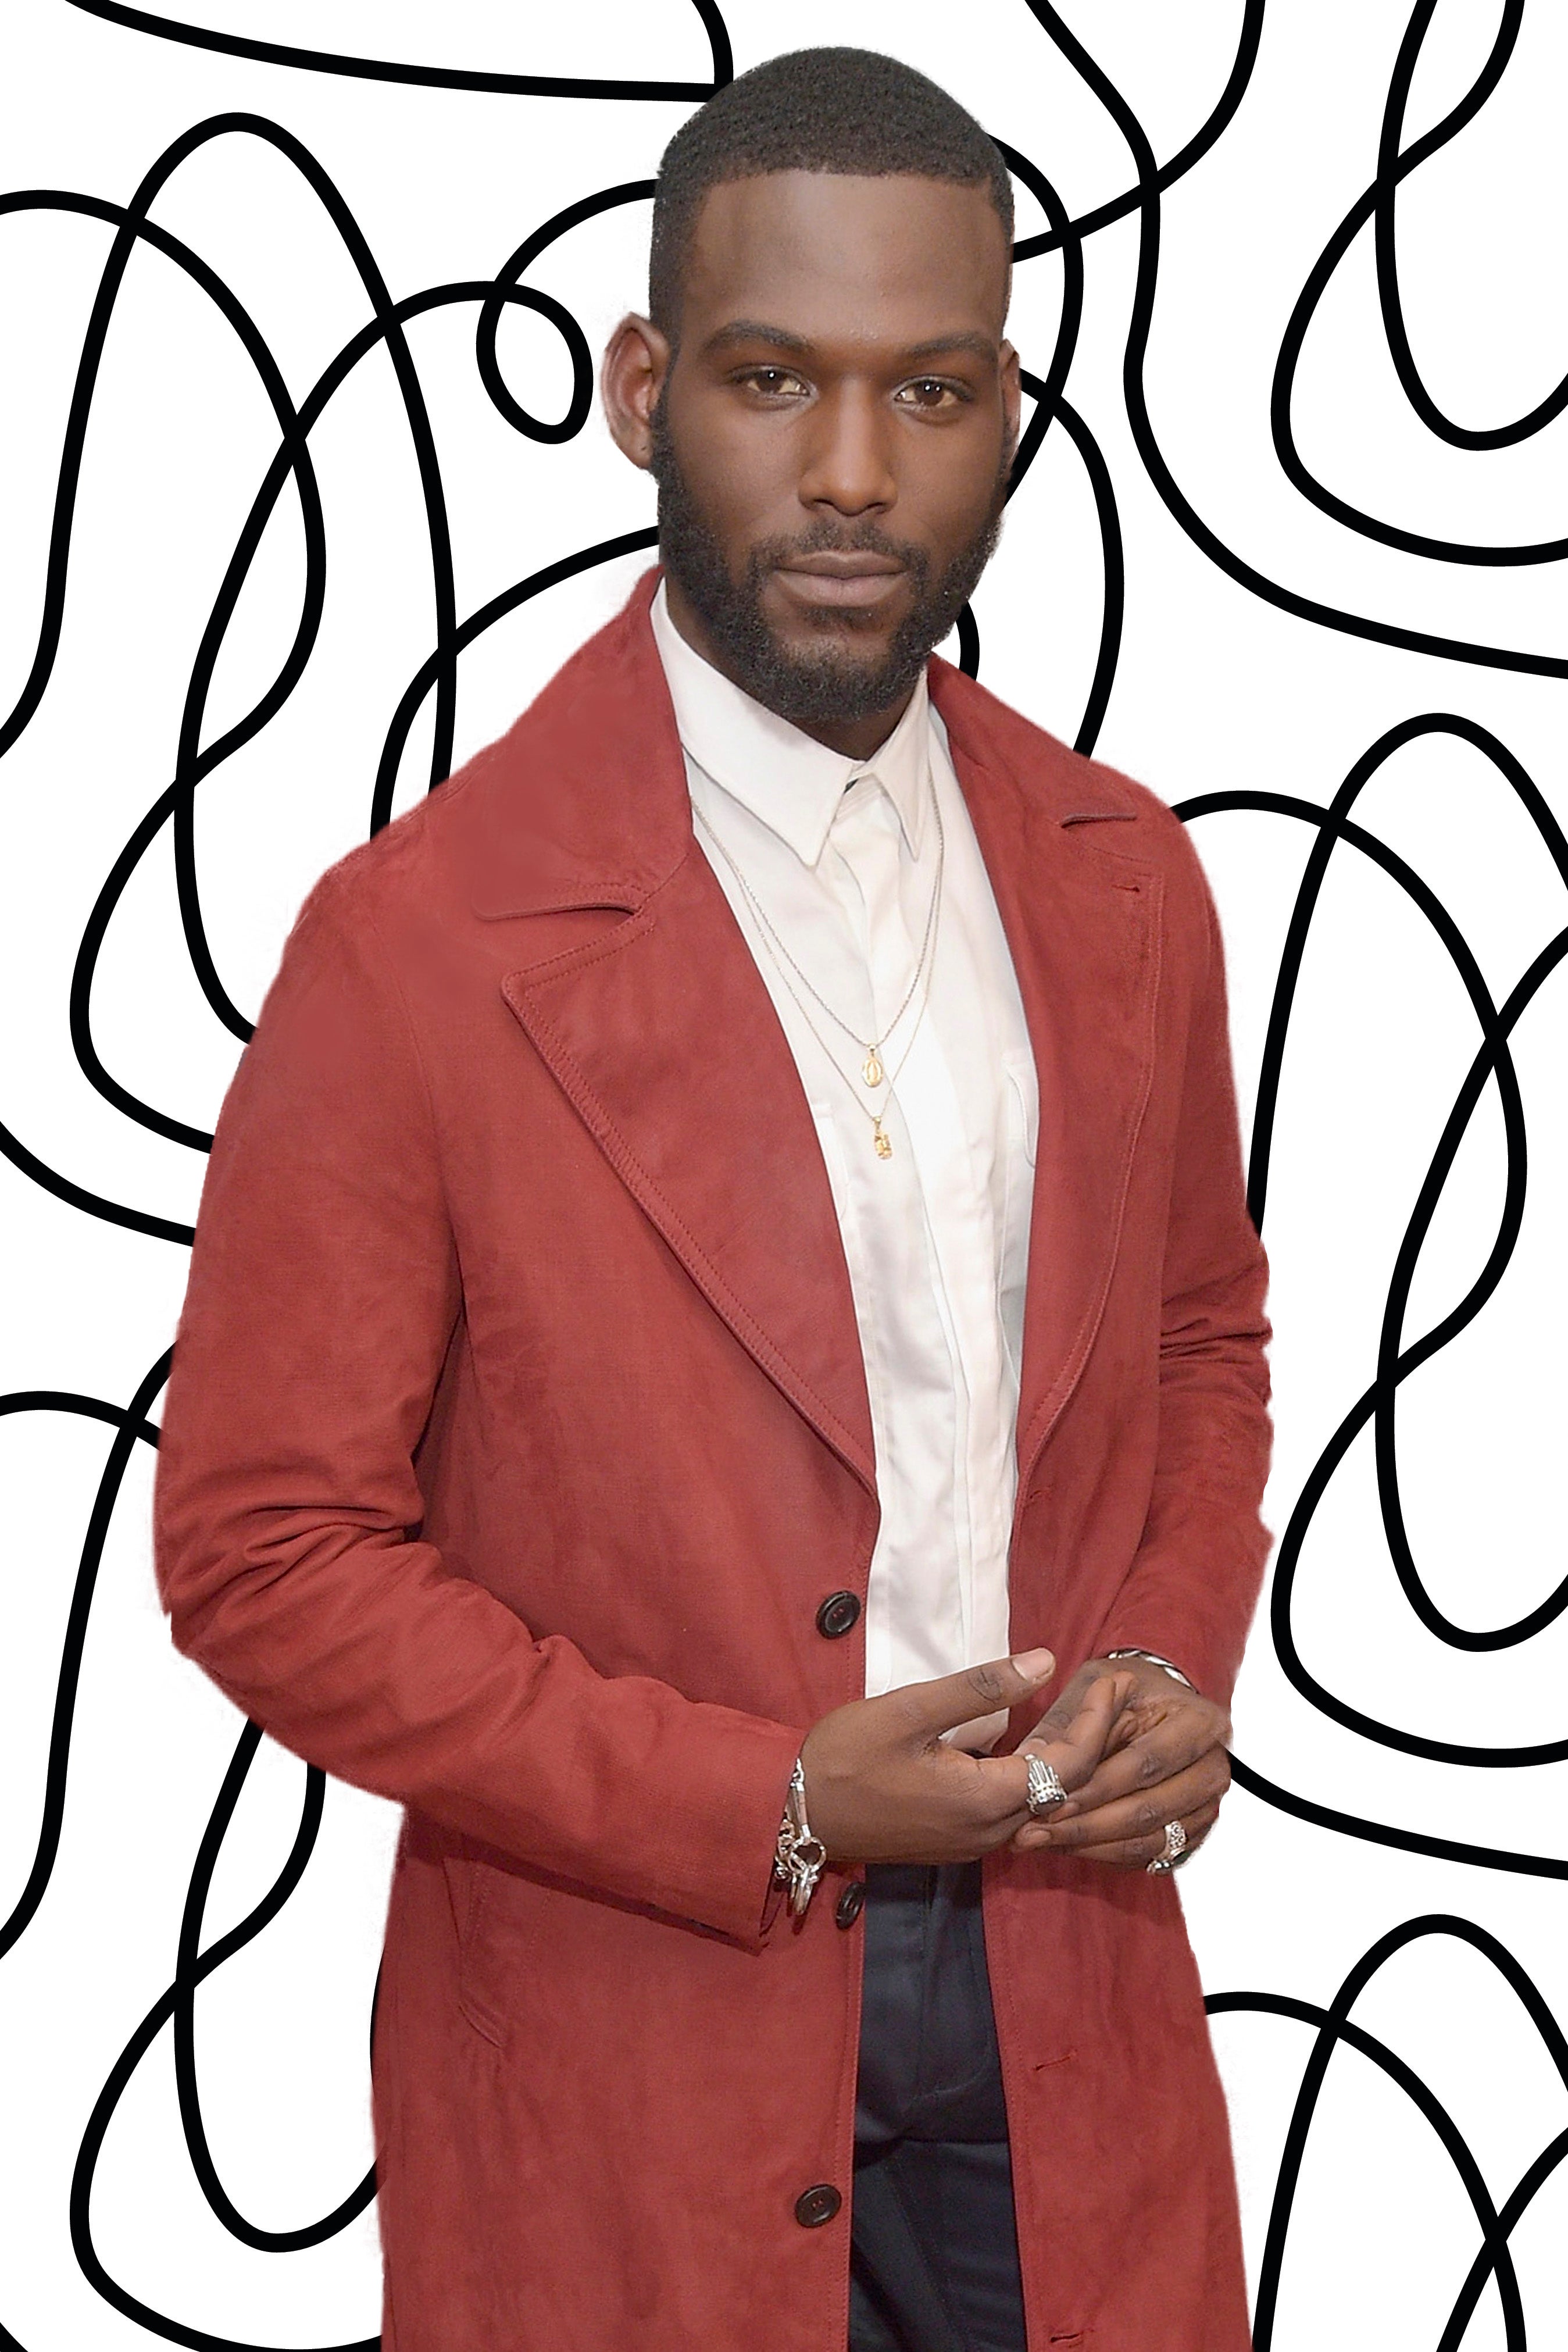 Kofi Siriboe Reveals How His West African Parents Reacted To His Acting Career
